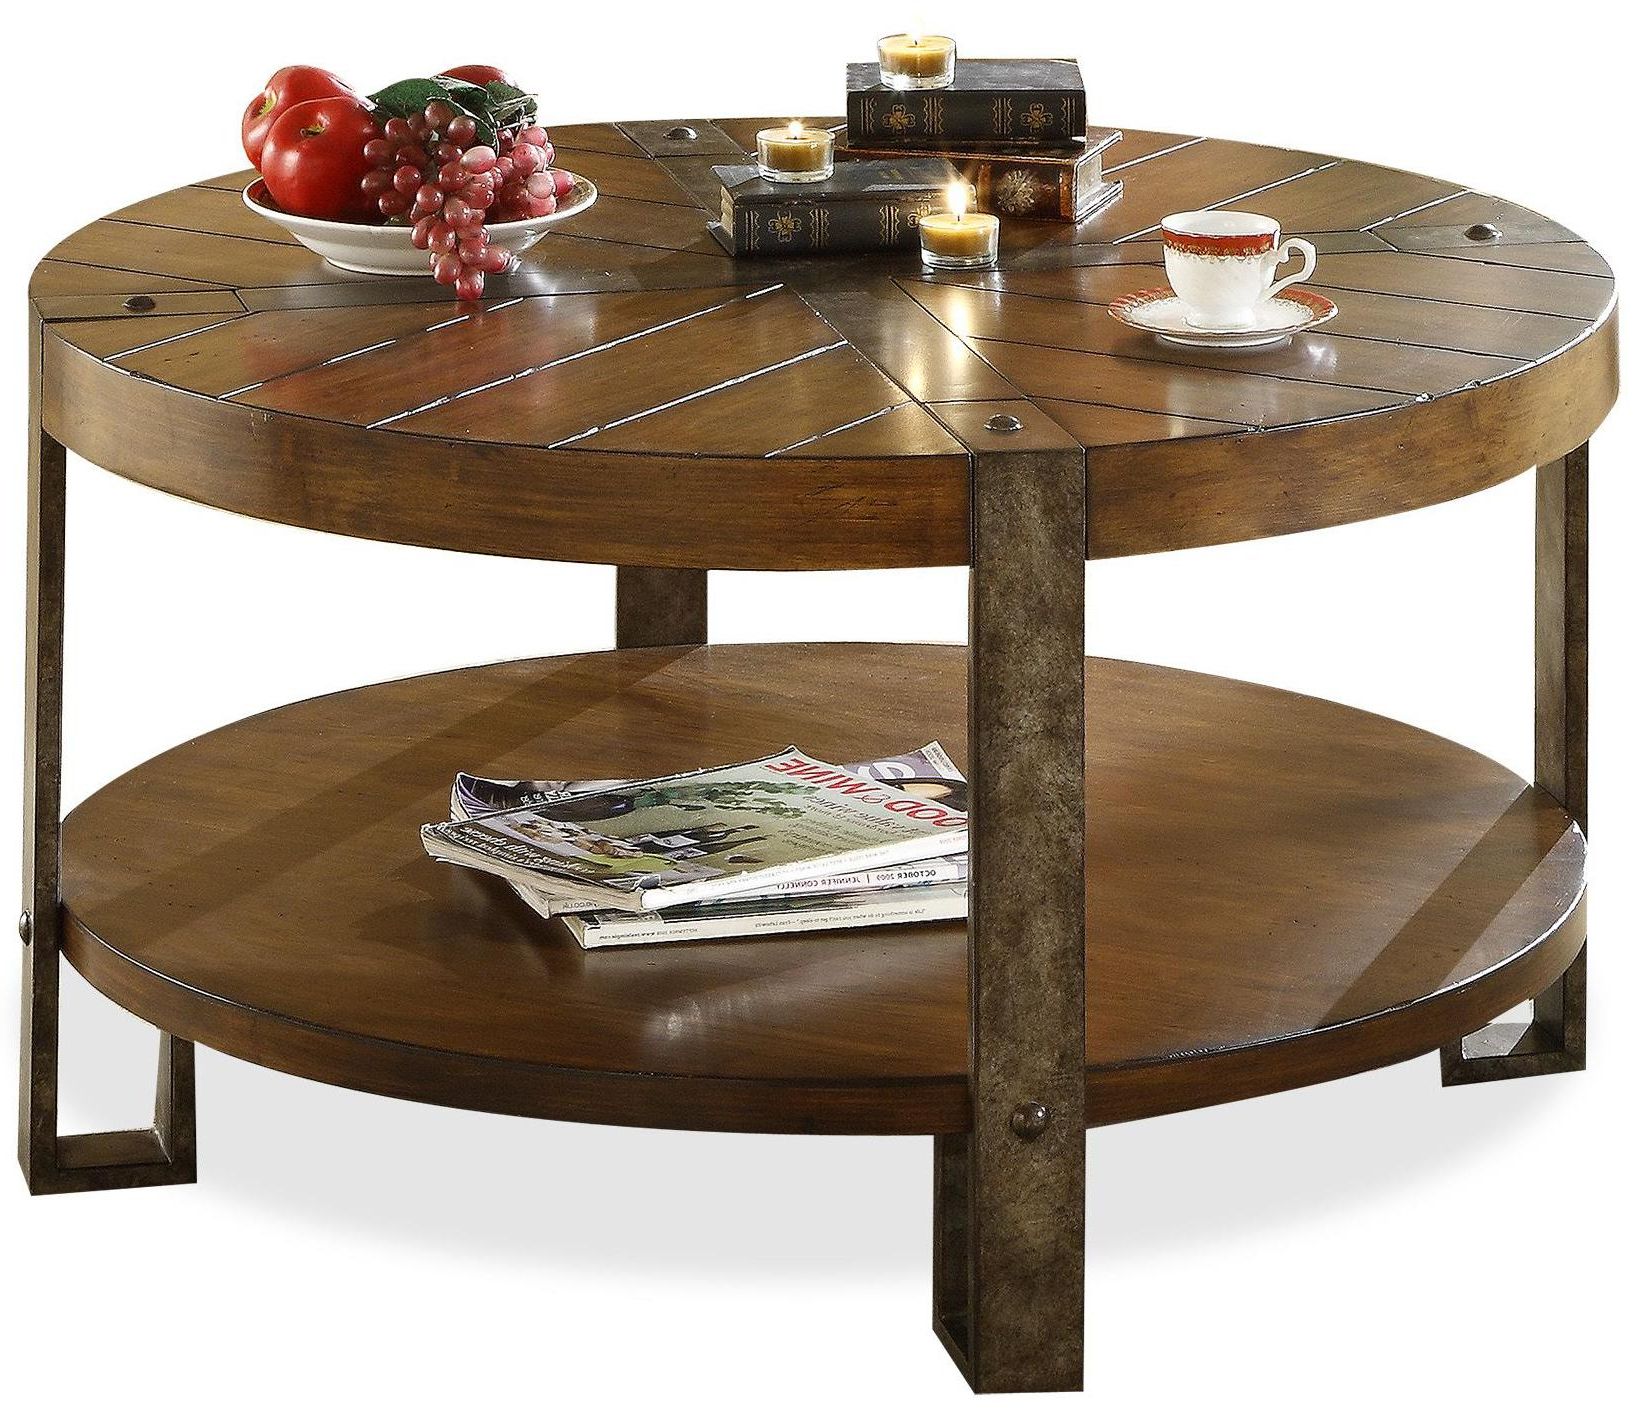 Awesome Round Coffee Tables With Storage | Homesfeed Intended For Rustic Wood Coffee Tables (Gallery 20 of 20)